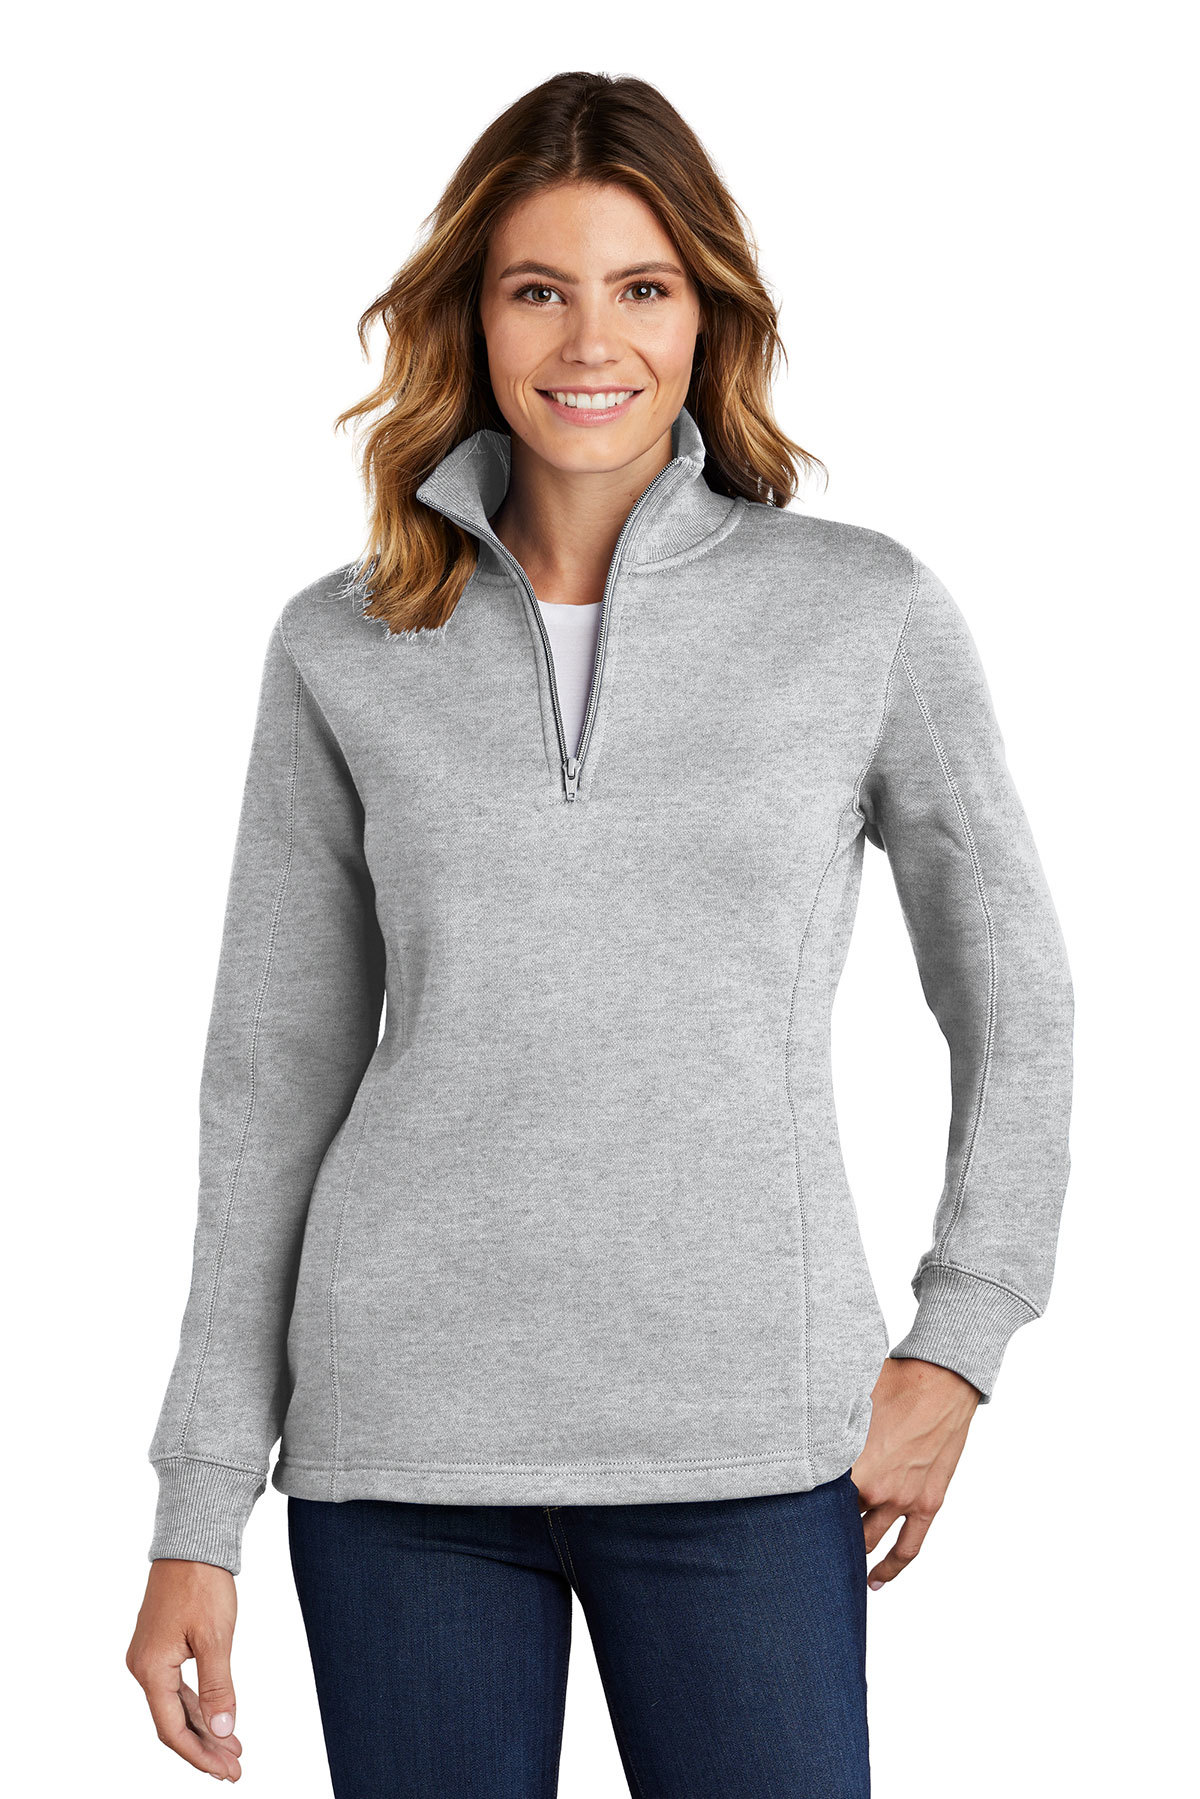 Women's 1/4 & 1/2 zip – Affiliated Sports Group / Groupe Sport